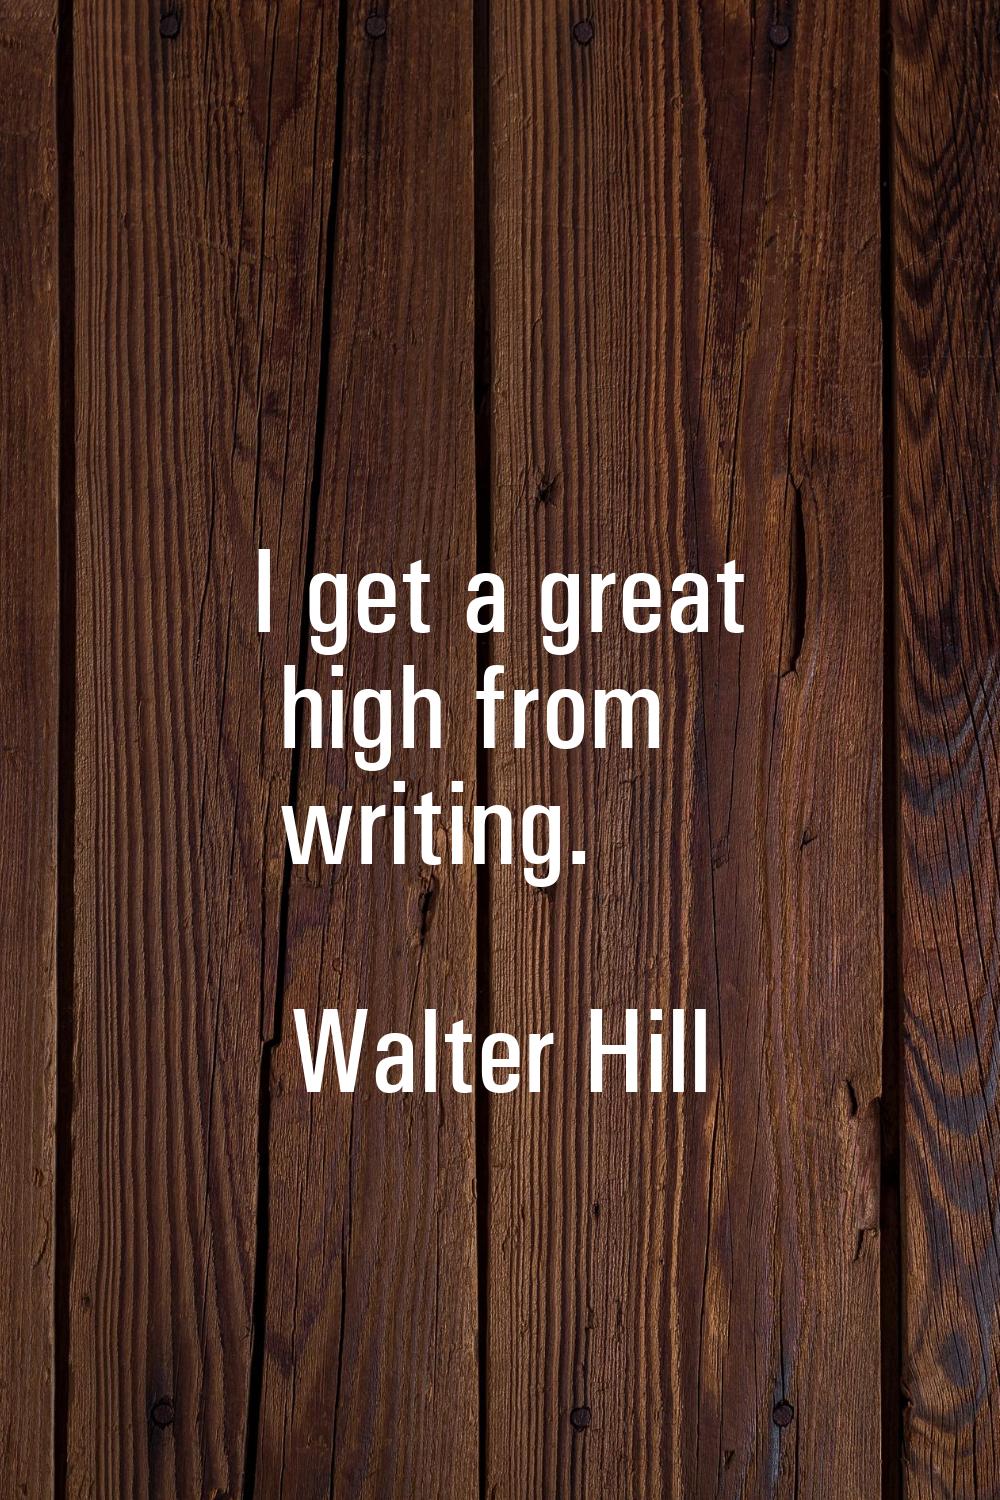 I get a great high from writing.